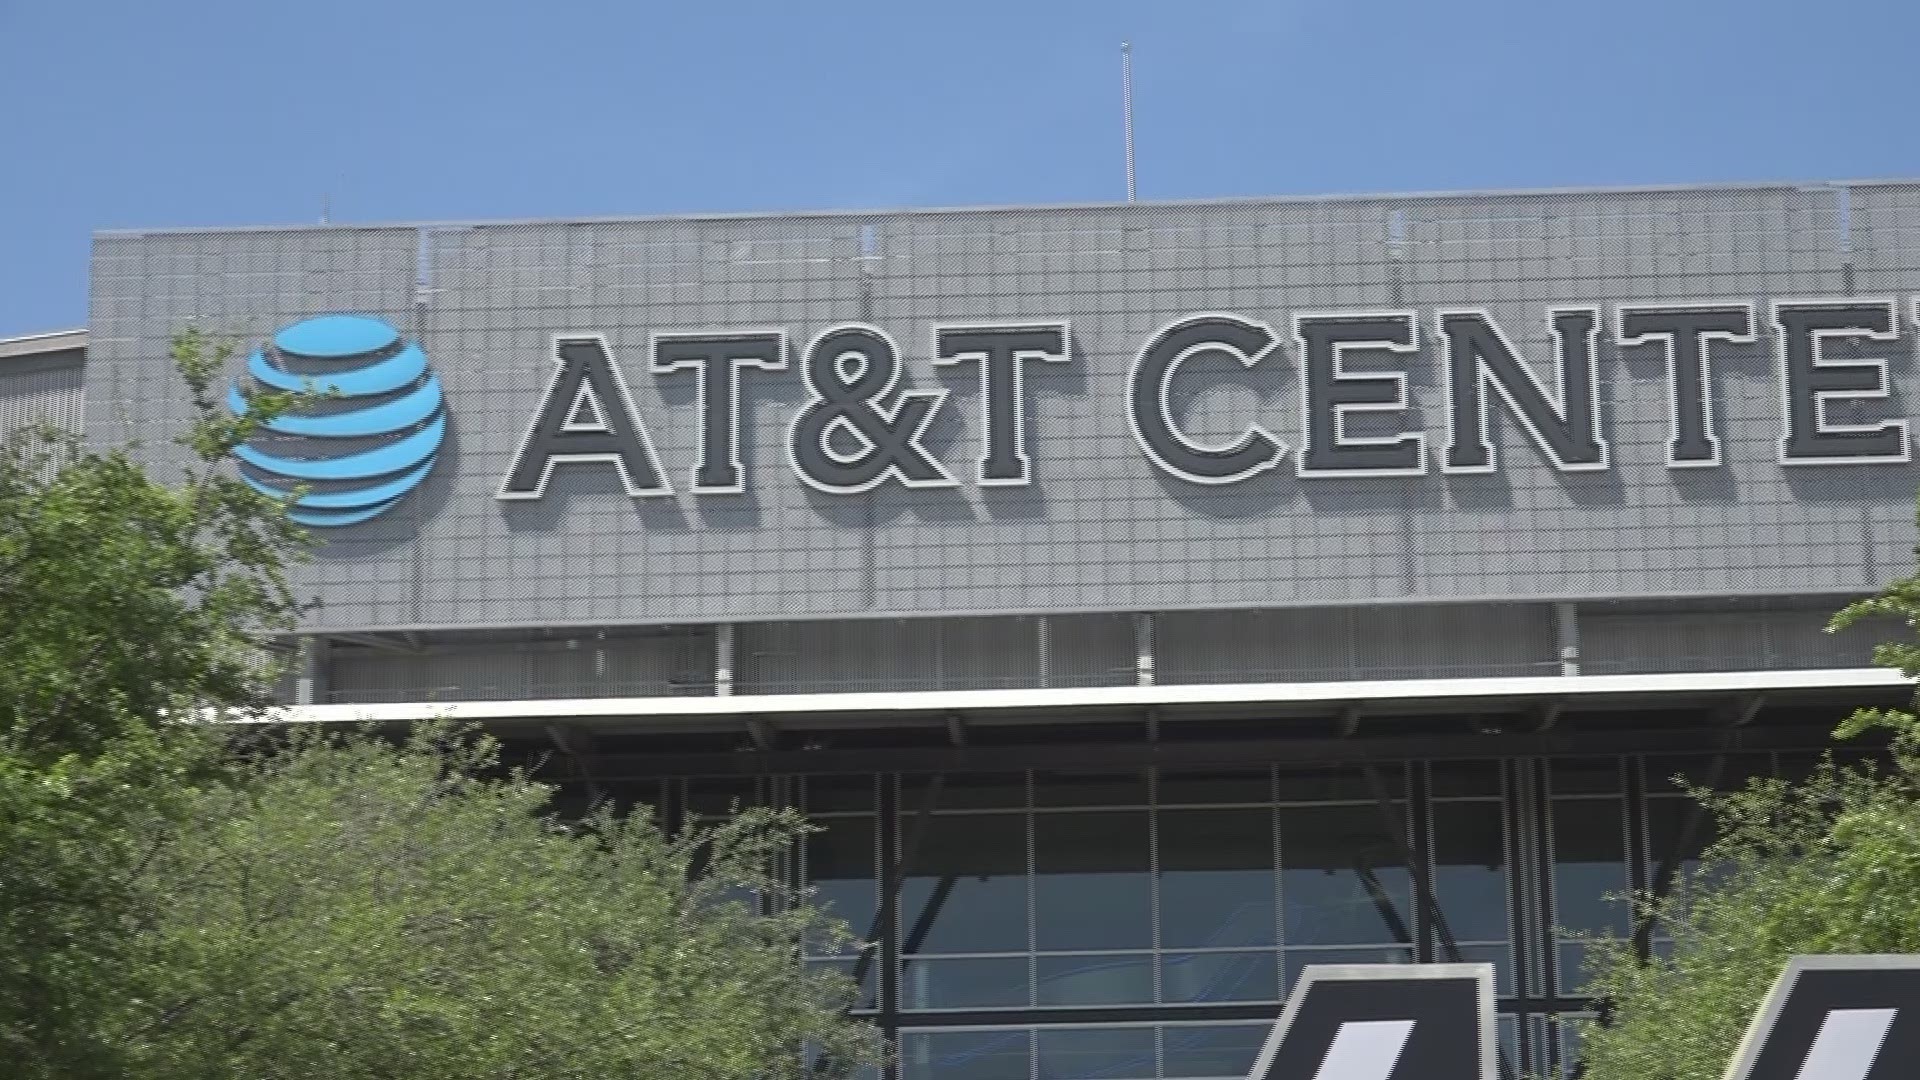 Tuesday is the 12th annual World Autism Awareness Day. We followed the light blue ribbons to the AT&T Center to see how our San Antonio Spurs are creating more sensory-inclusive zones for autistic fans.